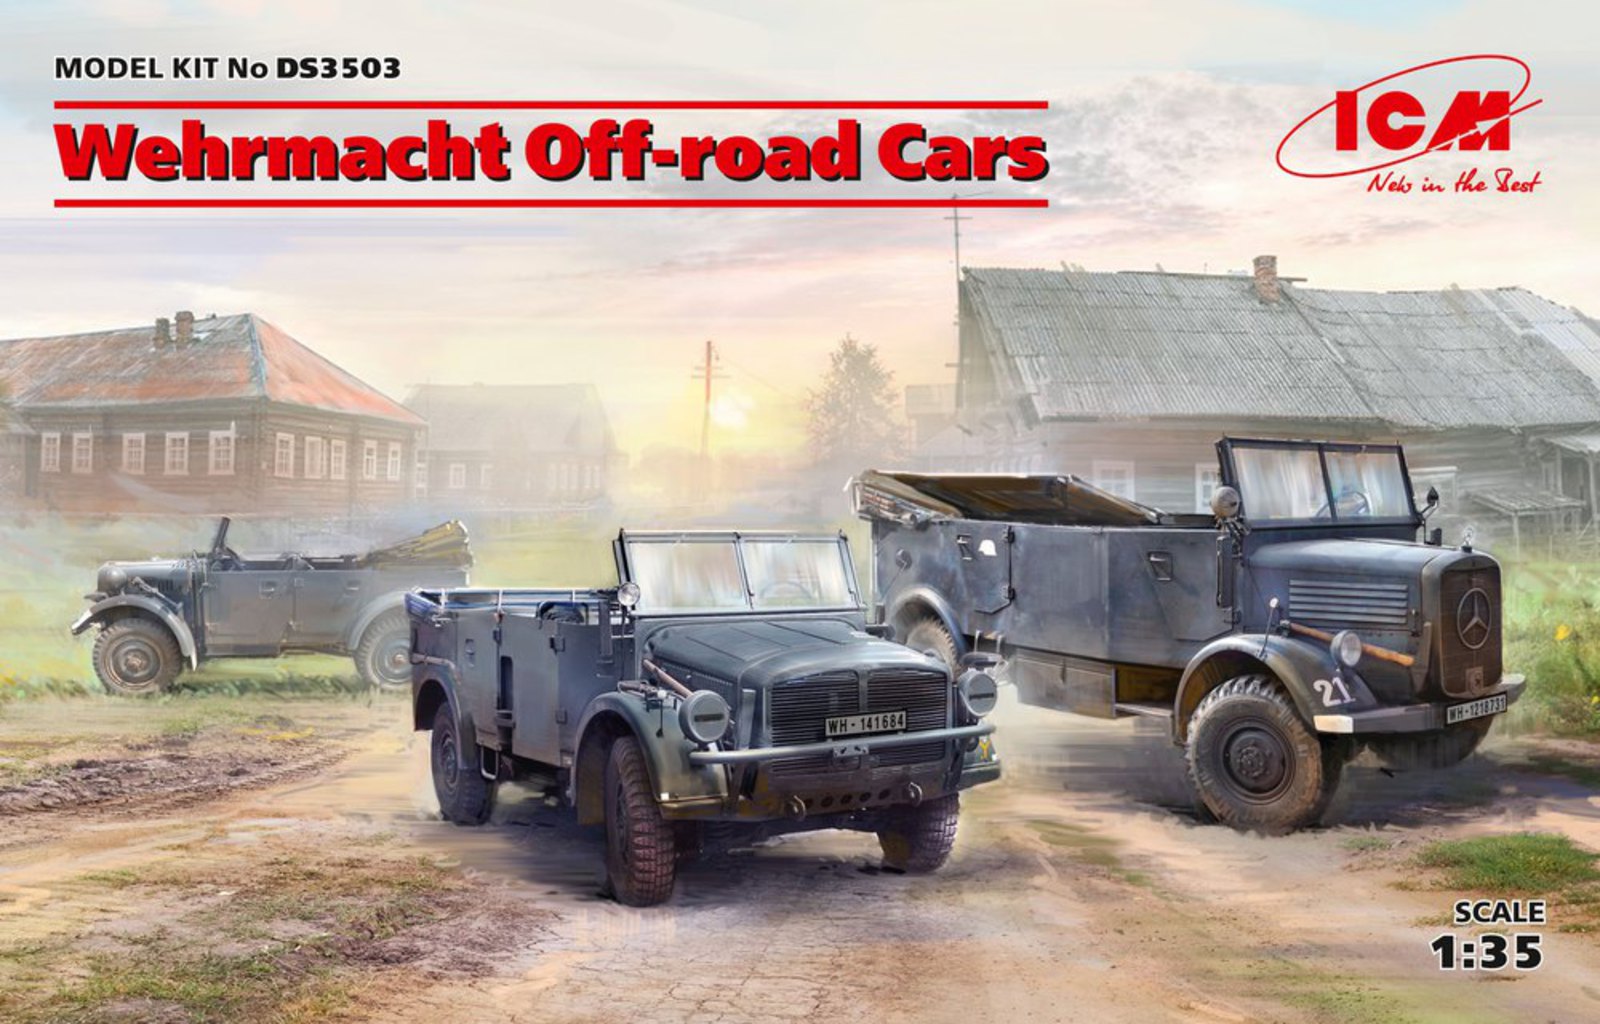 ICM Wehrmacht Off-road Cars (Kfz1,Horch 108 Typ 40, L1500A) 1:35 (DS3503)